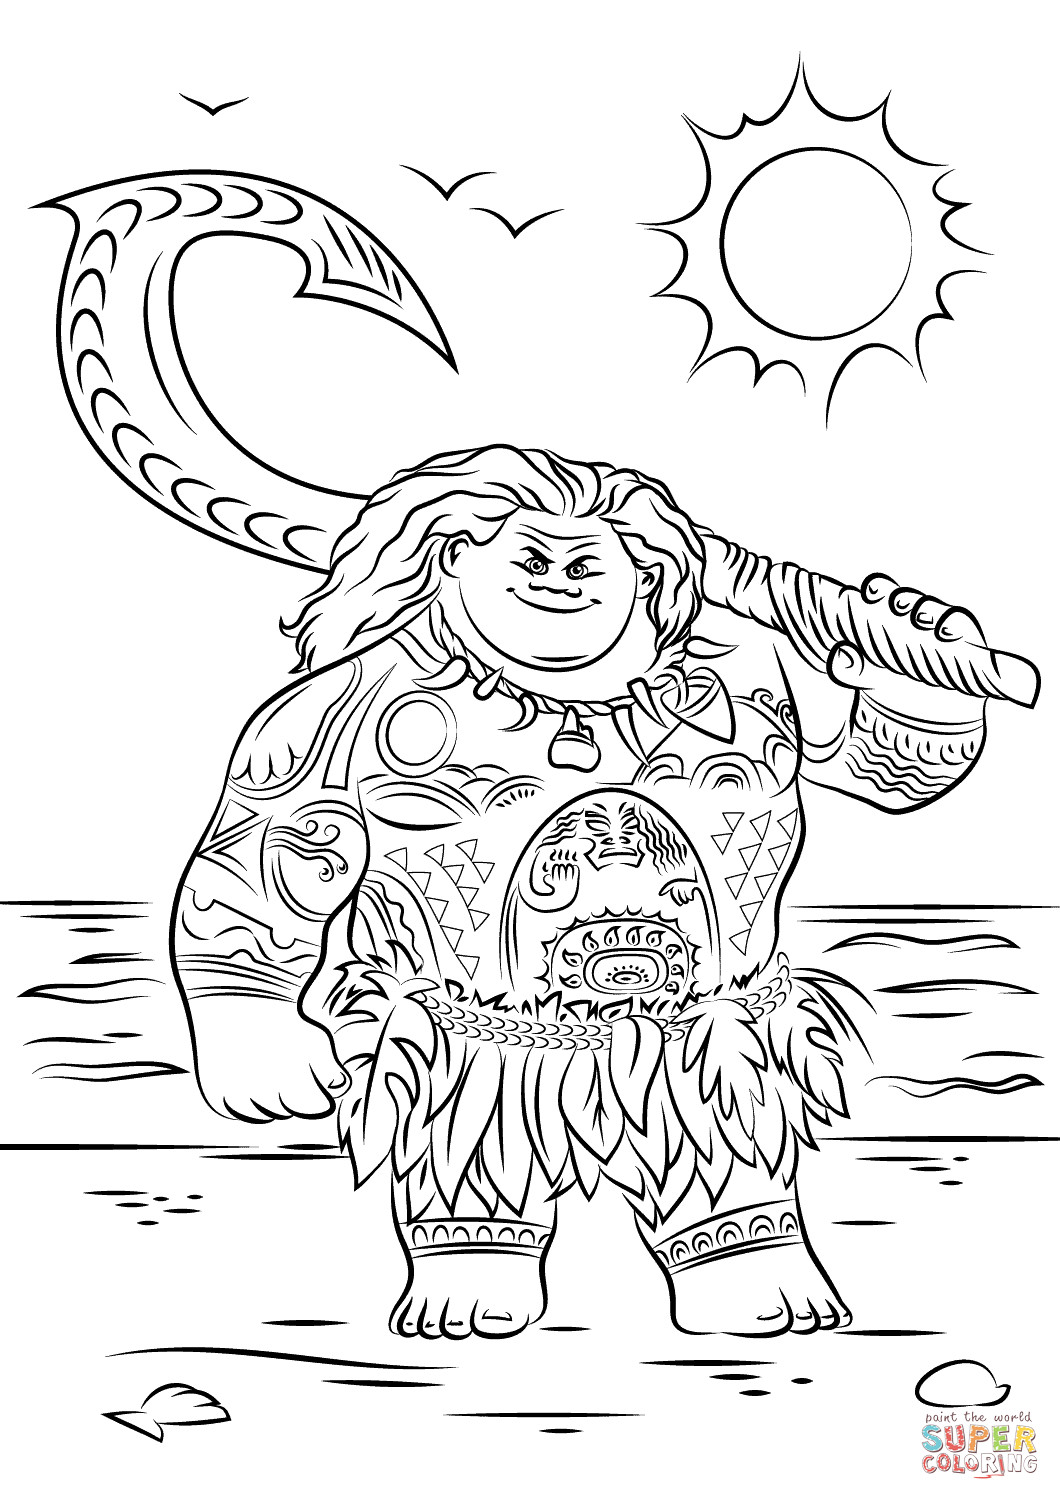 Printable Moana Coloring Pages
 Maui from Moana coloring page